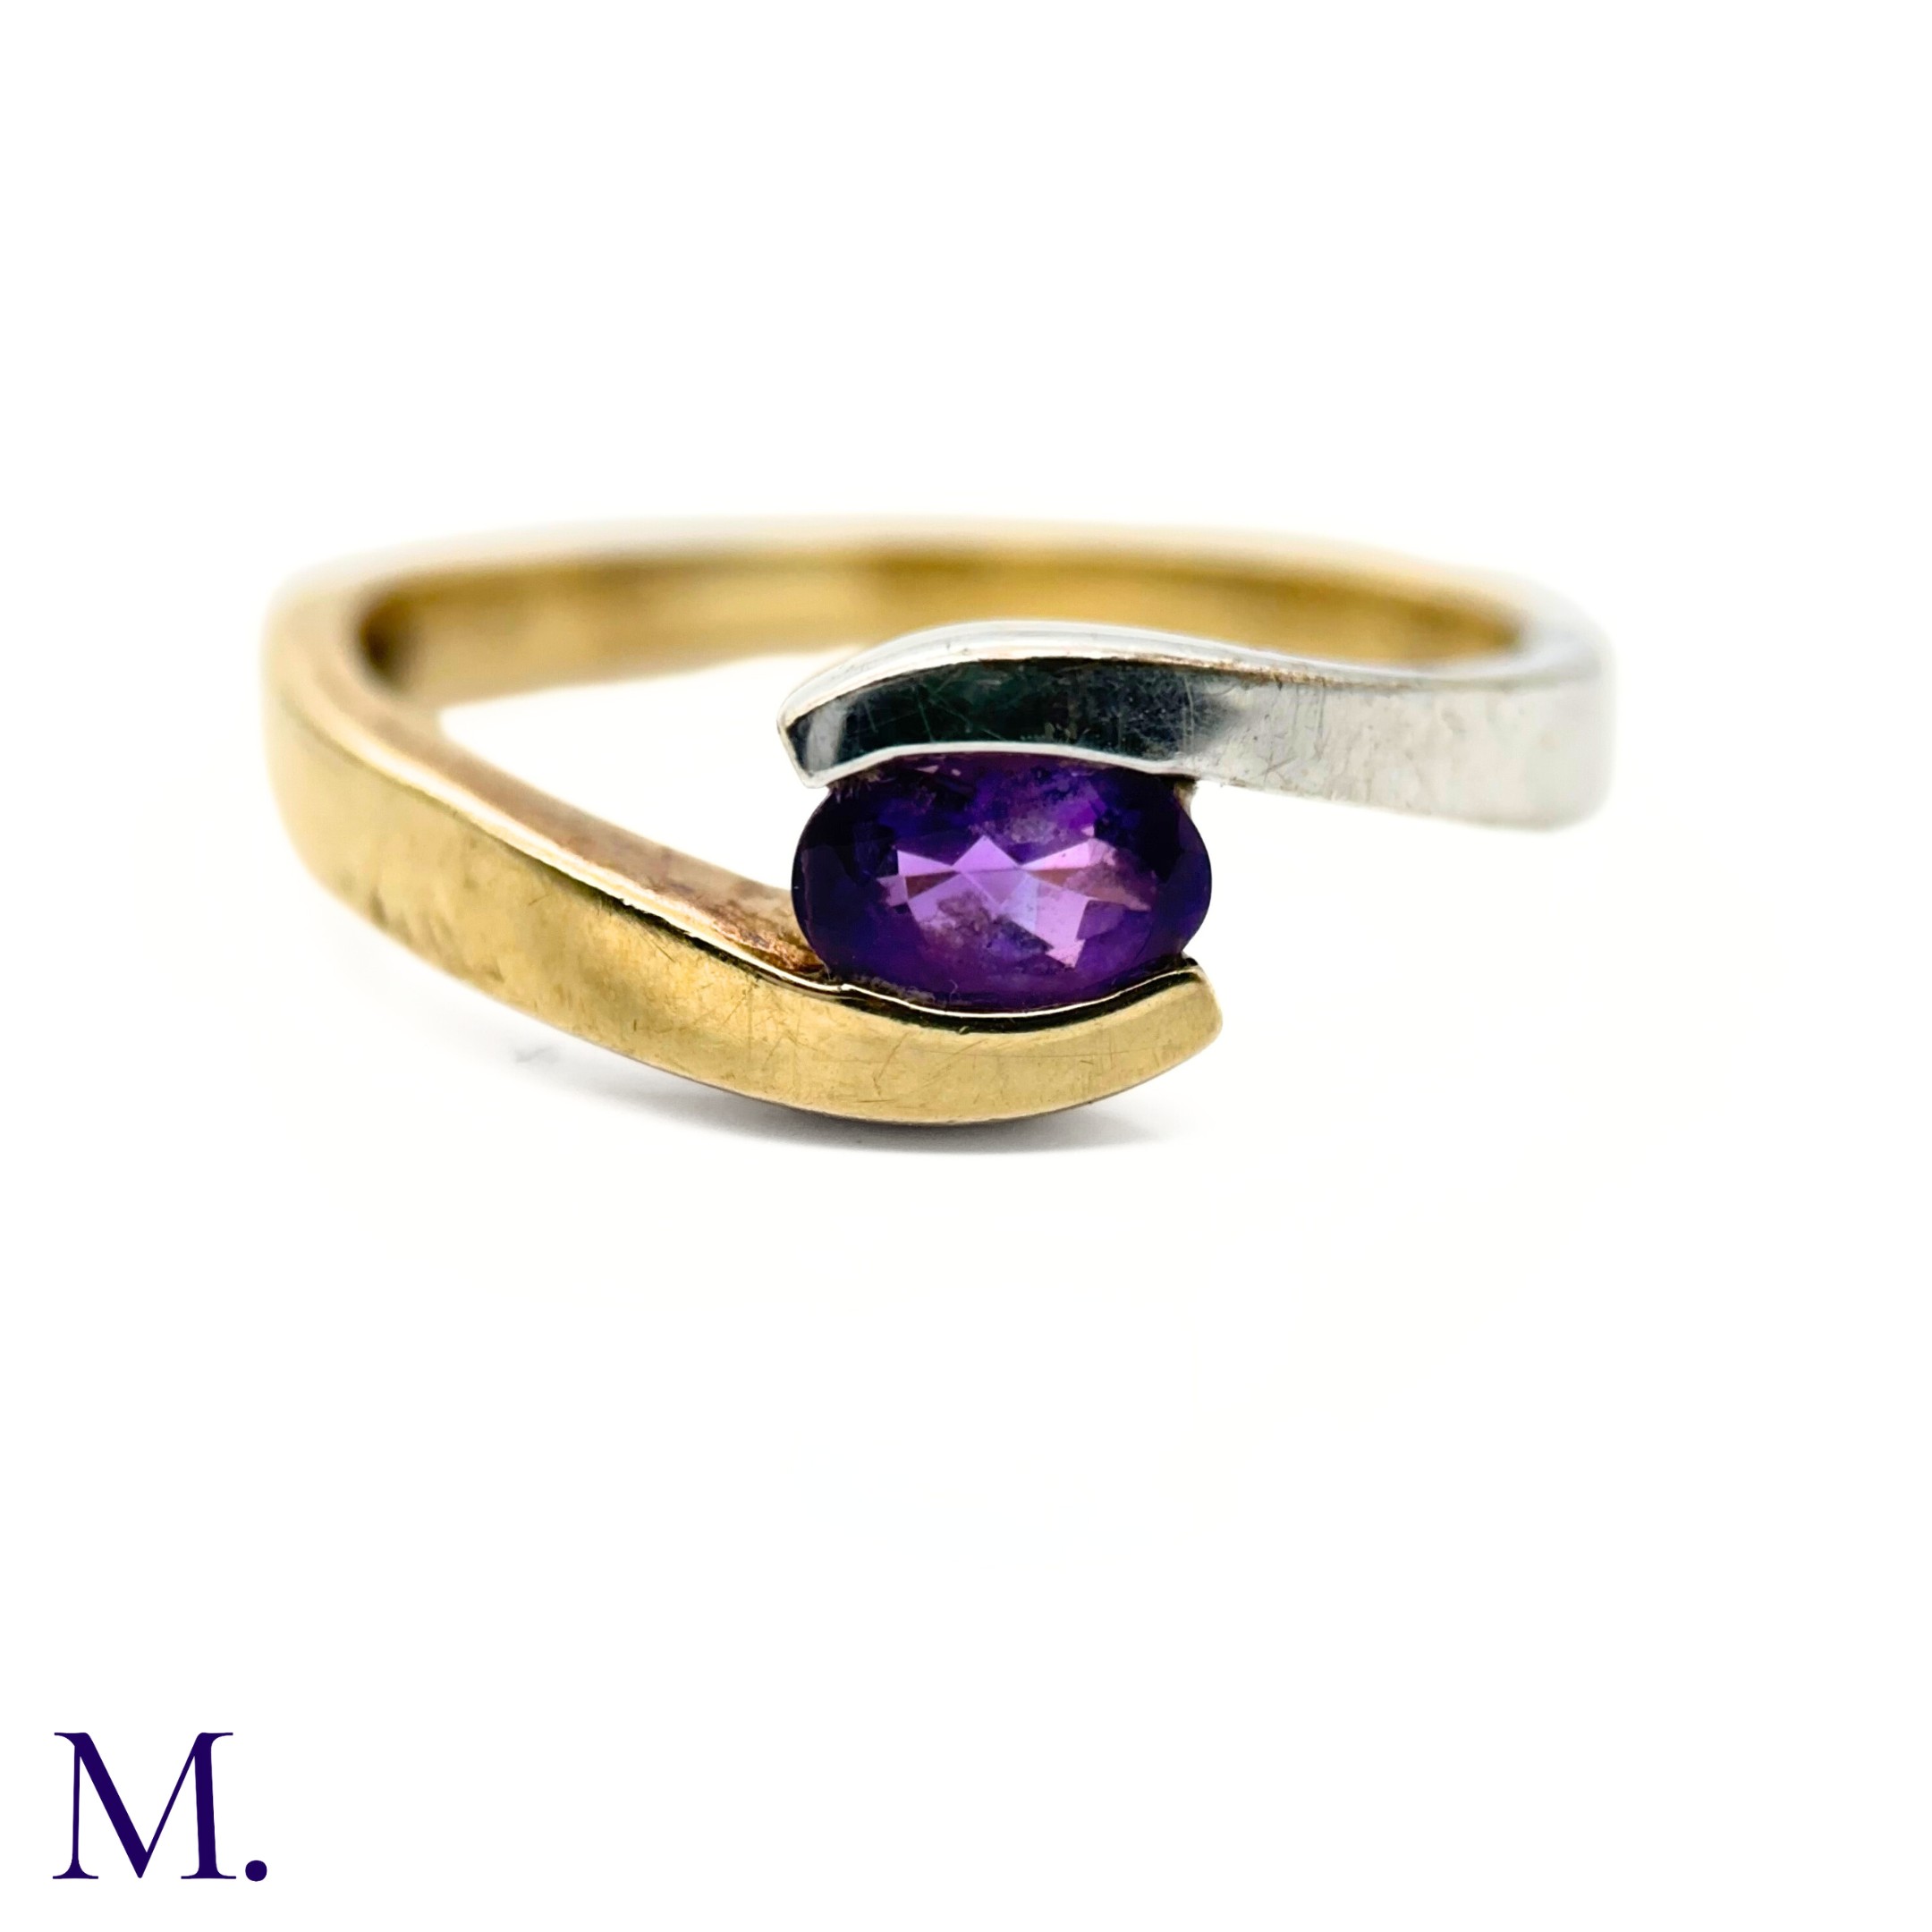 NO RESERVE - A Bi-Colour Gold and Amethyst Ring - Image 4 of 7